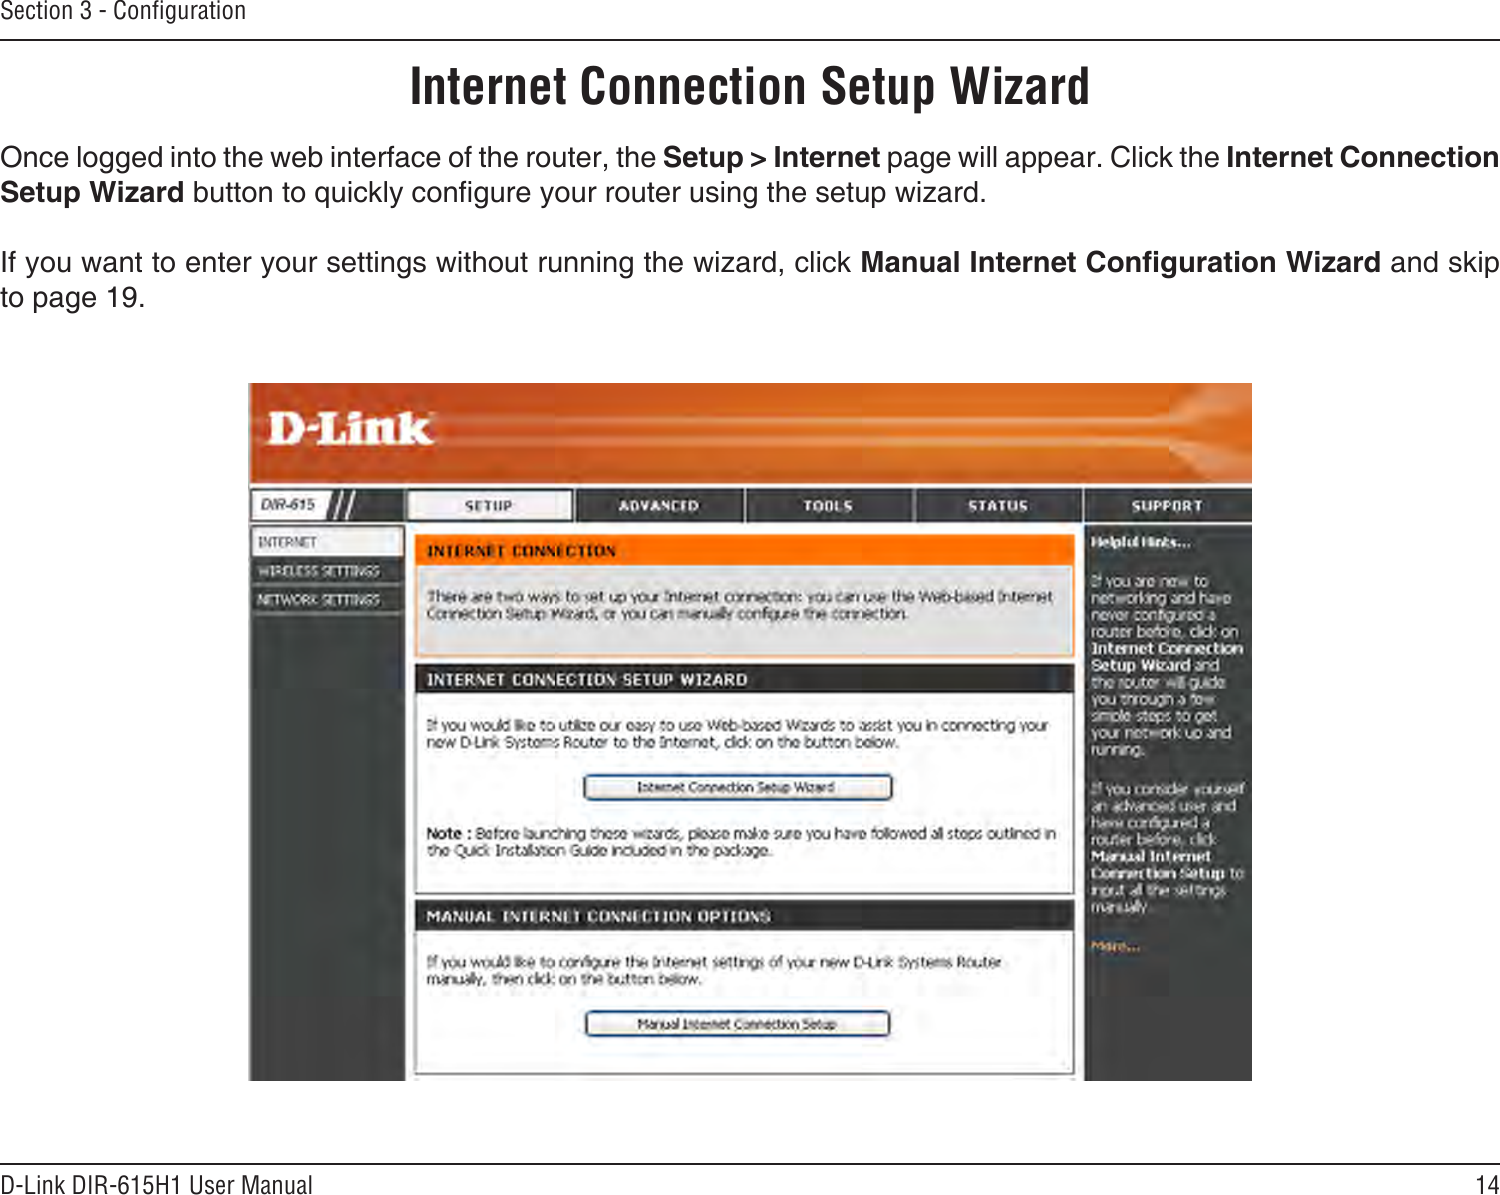 14D-Link DIR-615H1 User ManualSection 3 - CongurationInternet Connection Setup WizardOnce logged into the web interface of the router, the Setup &gt; Internet page will appear. Click the Internet Connection Setup Wizard button to quickly congure your router using the setup wizard.If you want to enter your settings without running the wizard, click Manual Internet Conguration Wizard and skip to page 19.